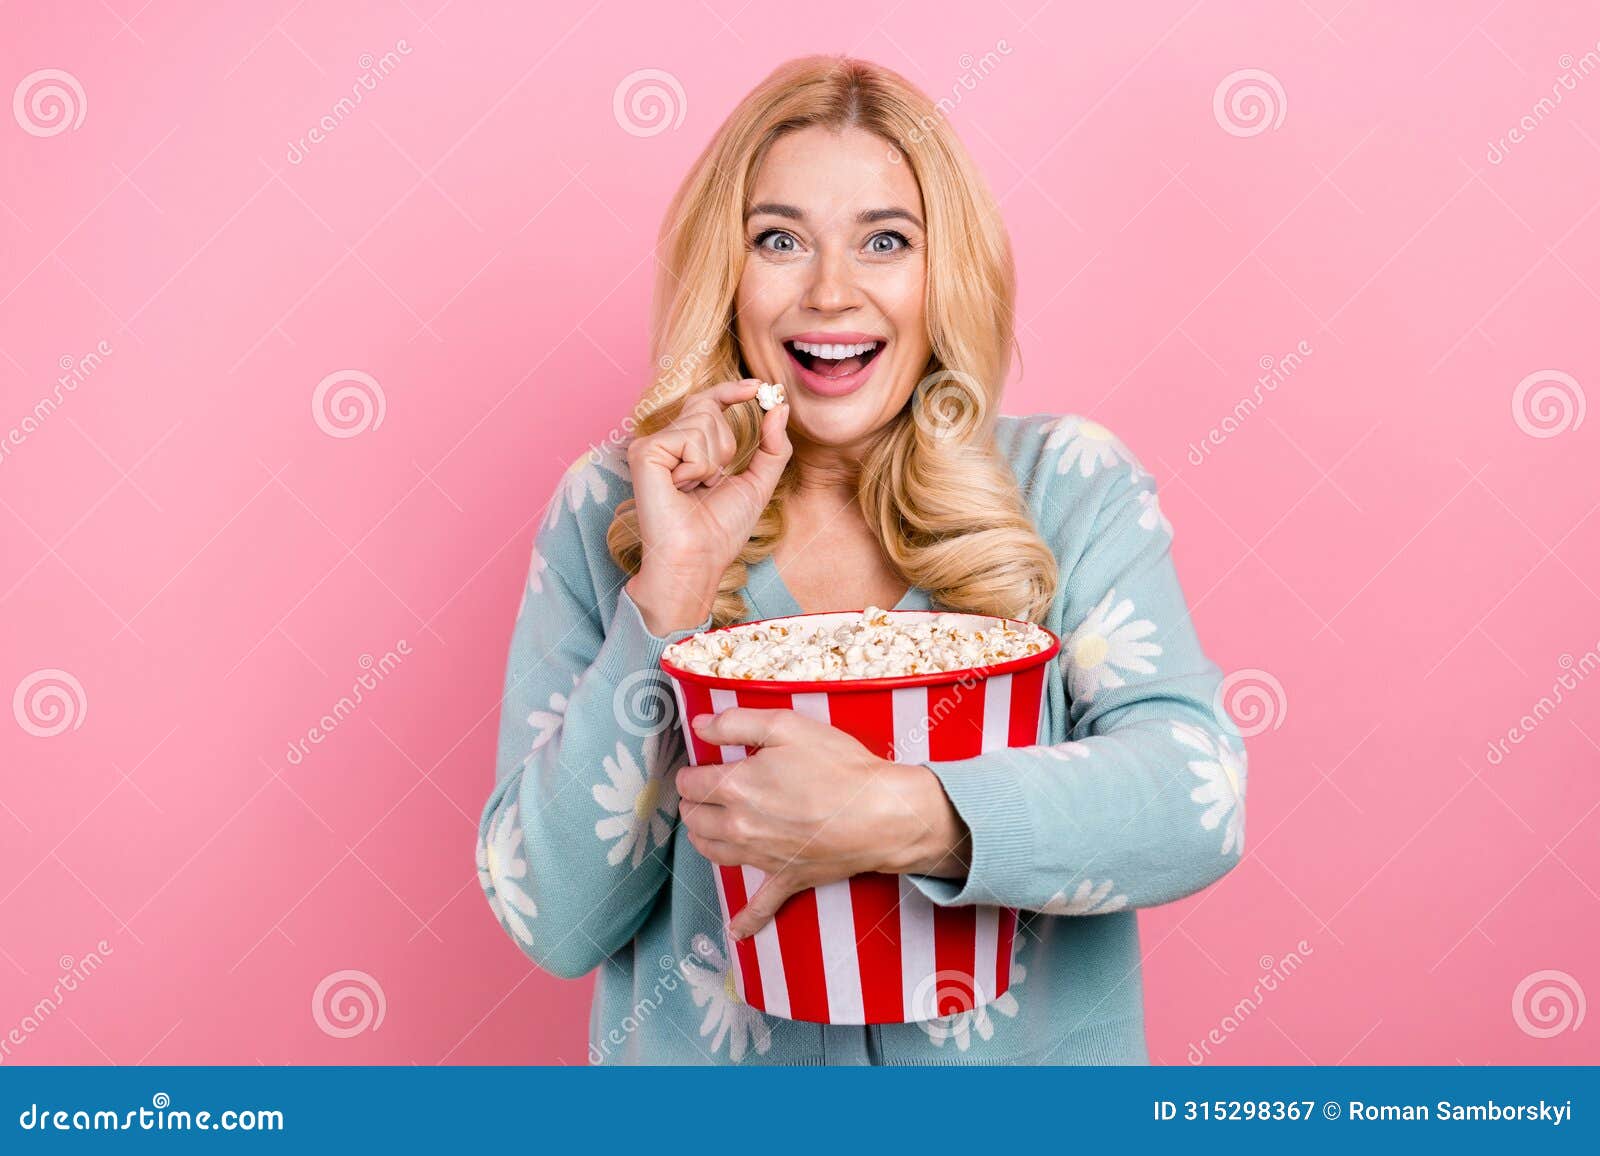 portrait of impressed person with curly hair wear blue cardigan eat popcorn watch intersting movie  on pink